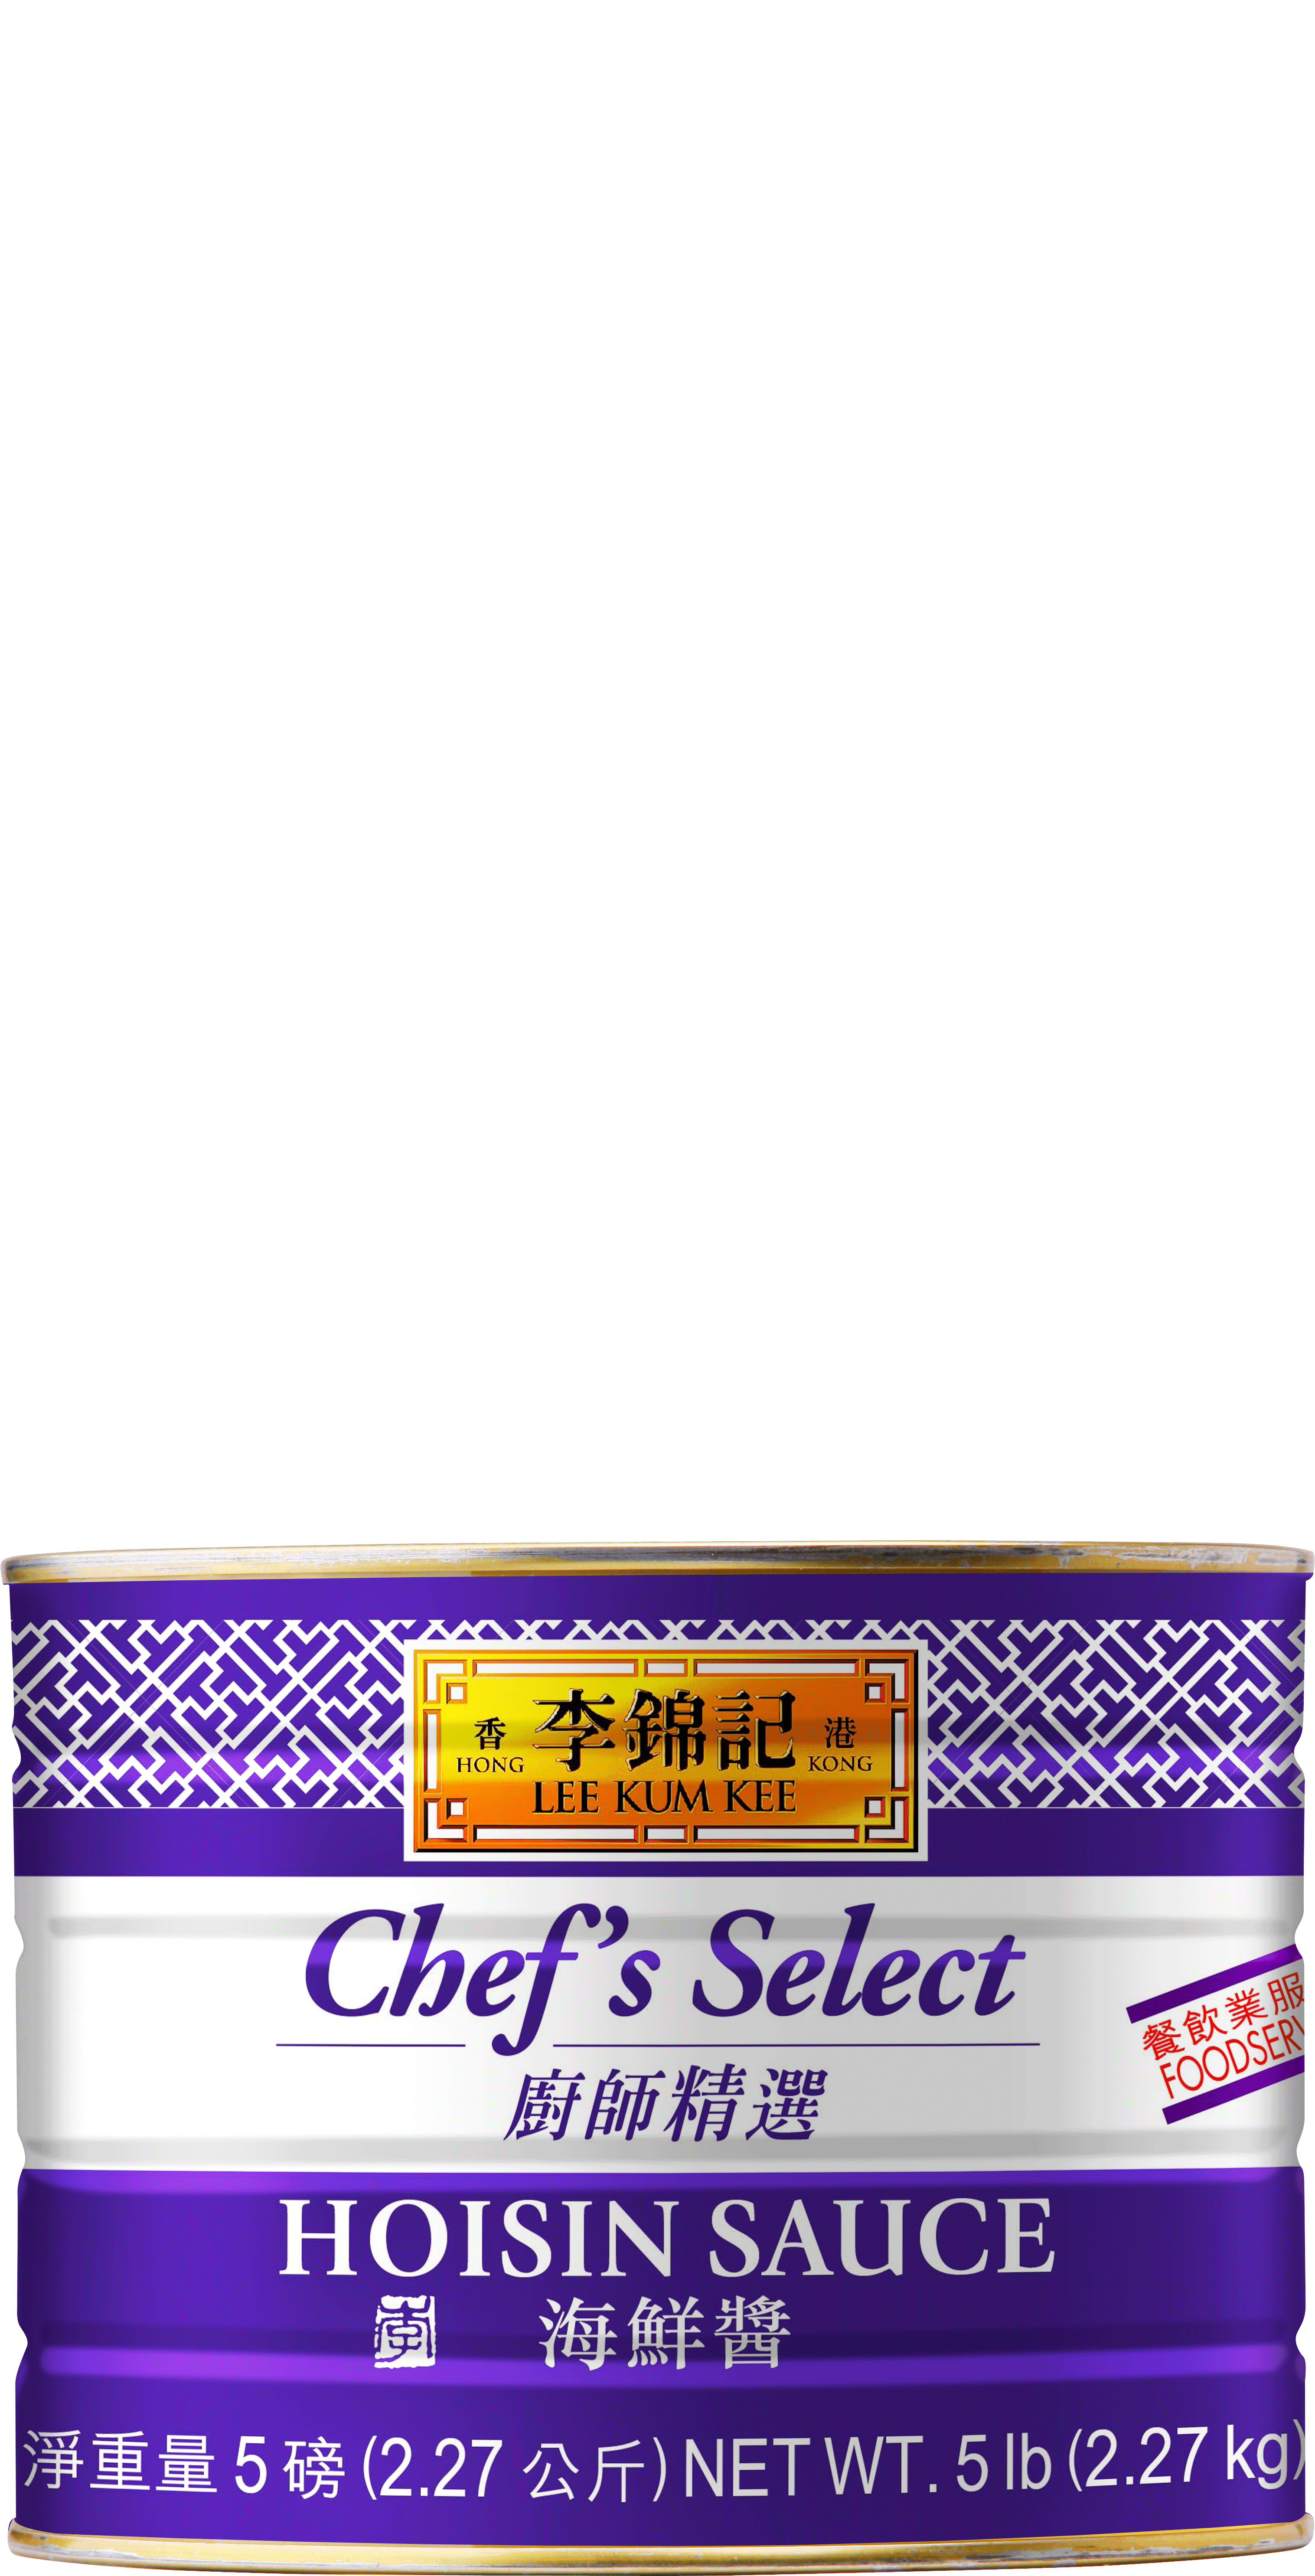 Chef’s Select Hoisin Sauce 5lb can